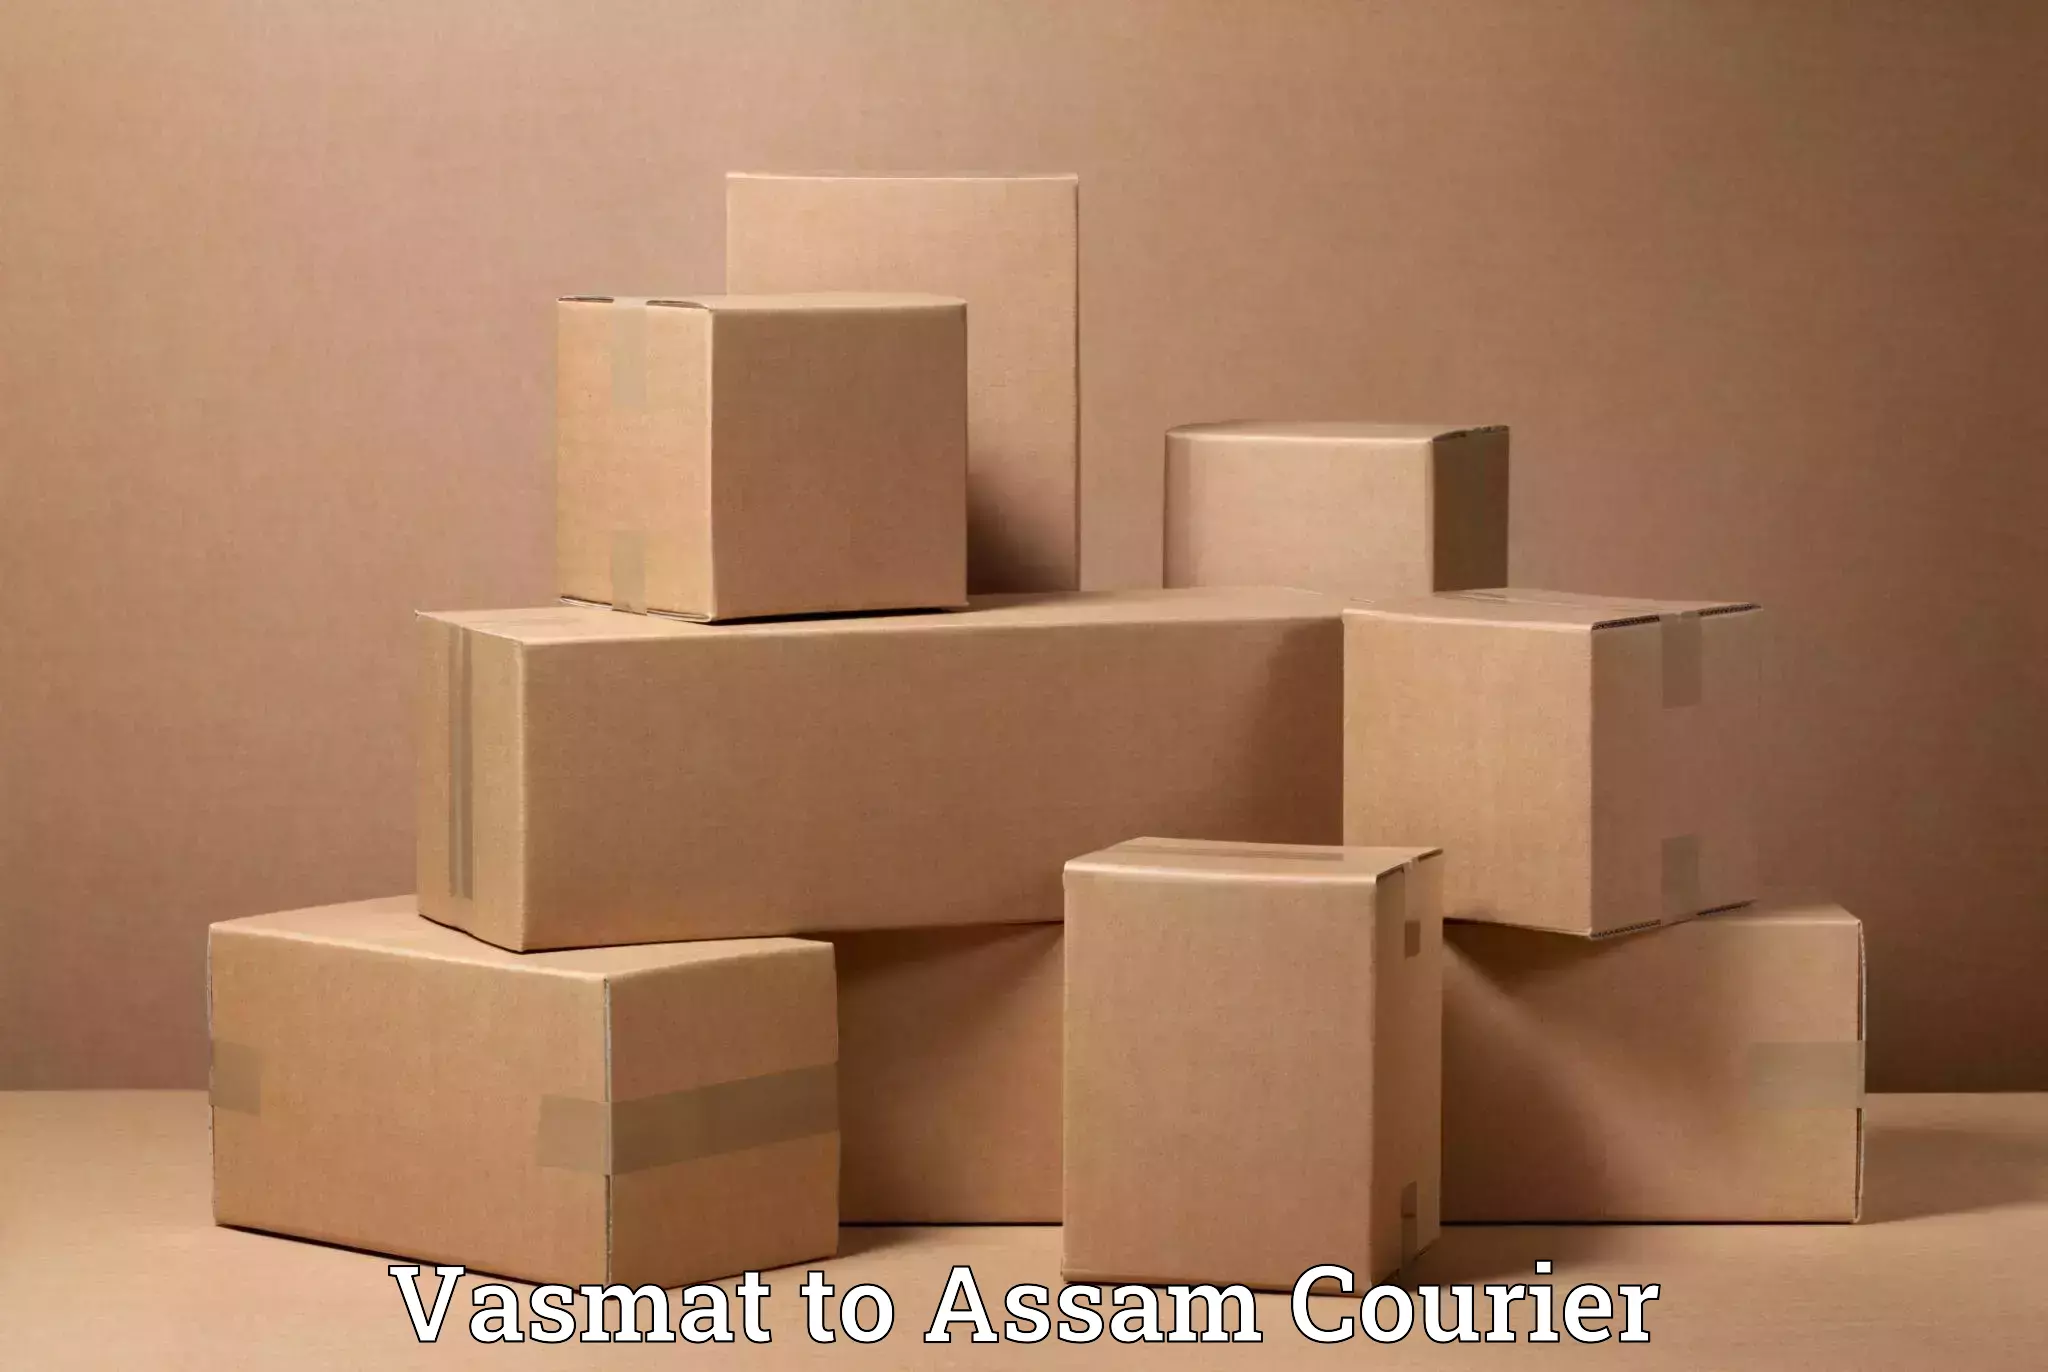 Efficient packing and moving Vasmat to Assam